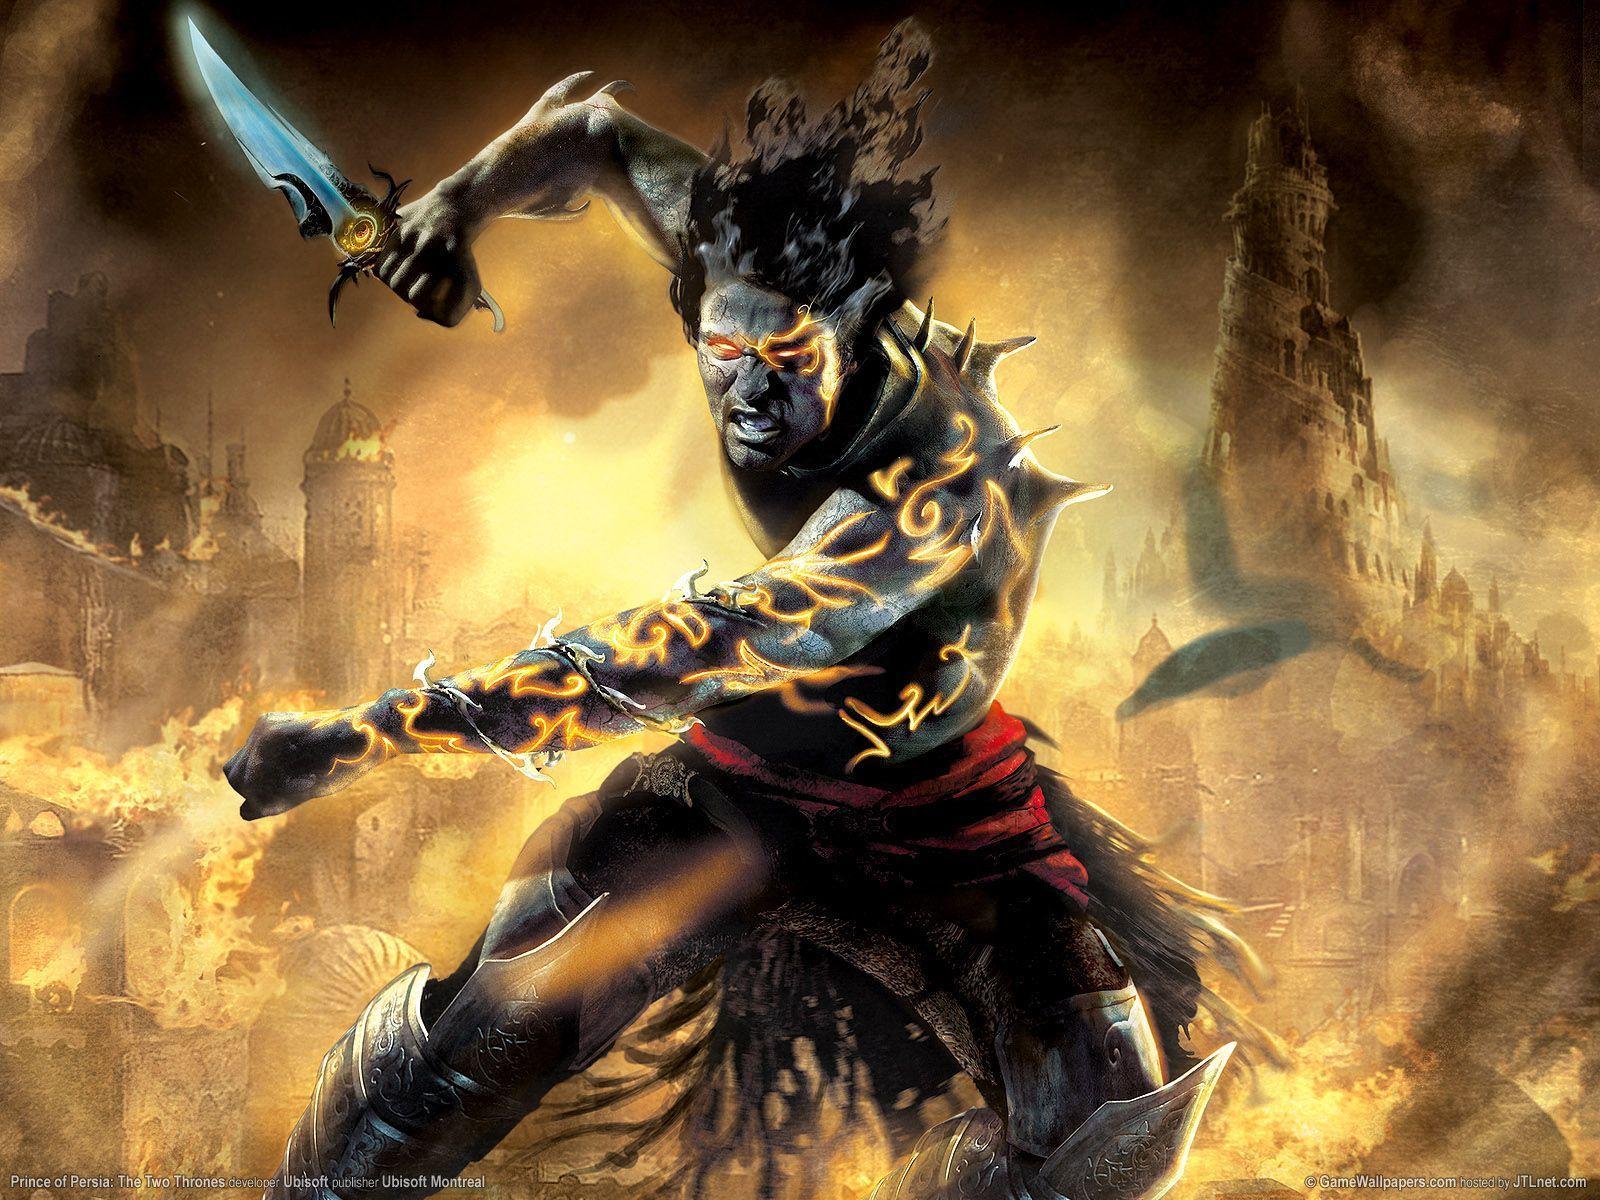 Prince of Persia The Two Thrones Wallpaper. Daily inspiration